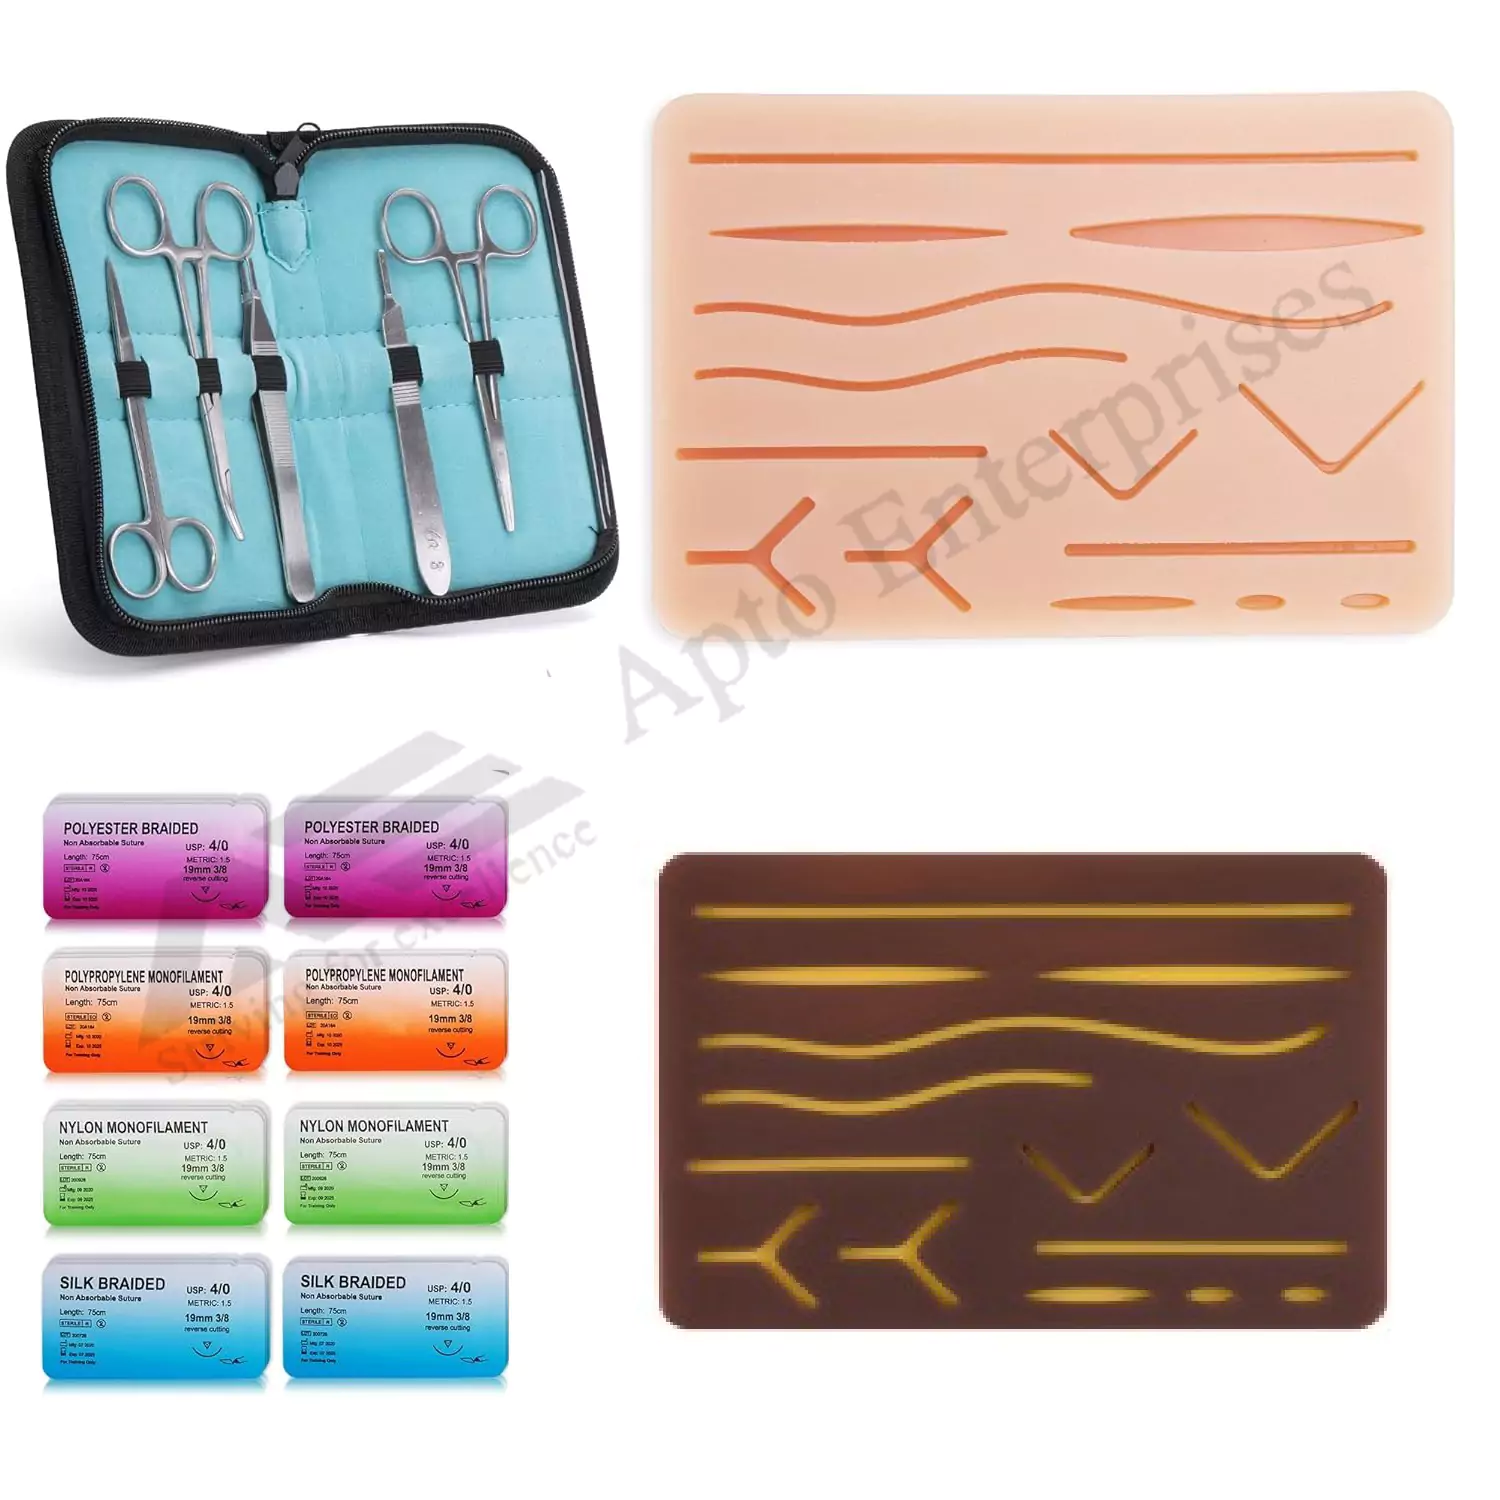 18. Comprehensive Suture Training Kit with Multi-Layer Suture Pad